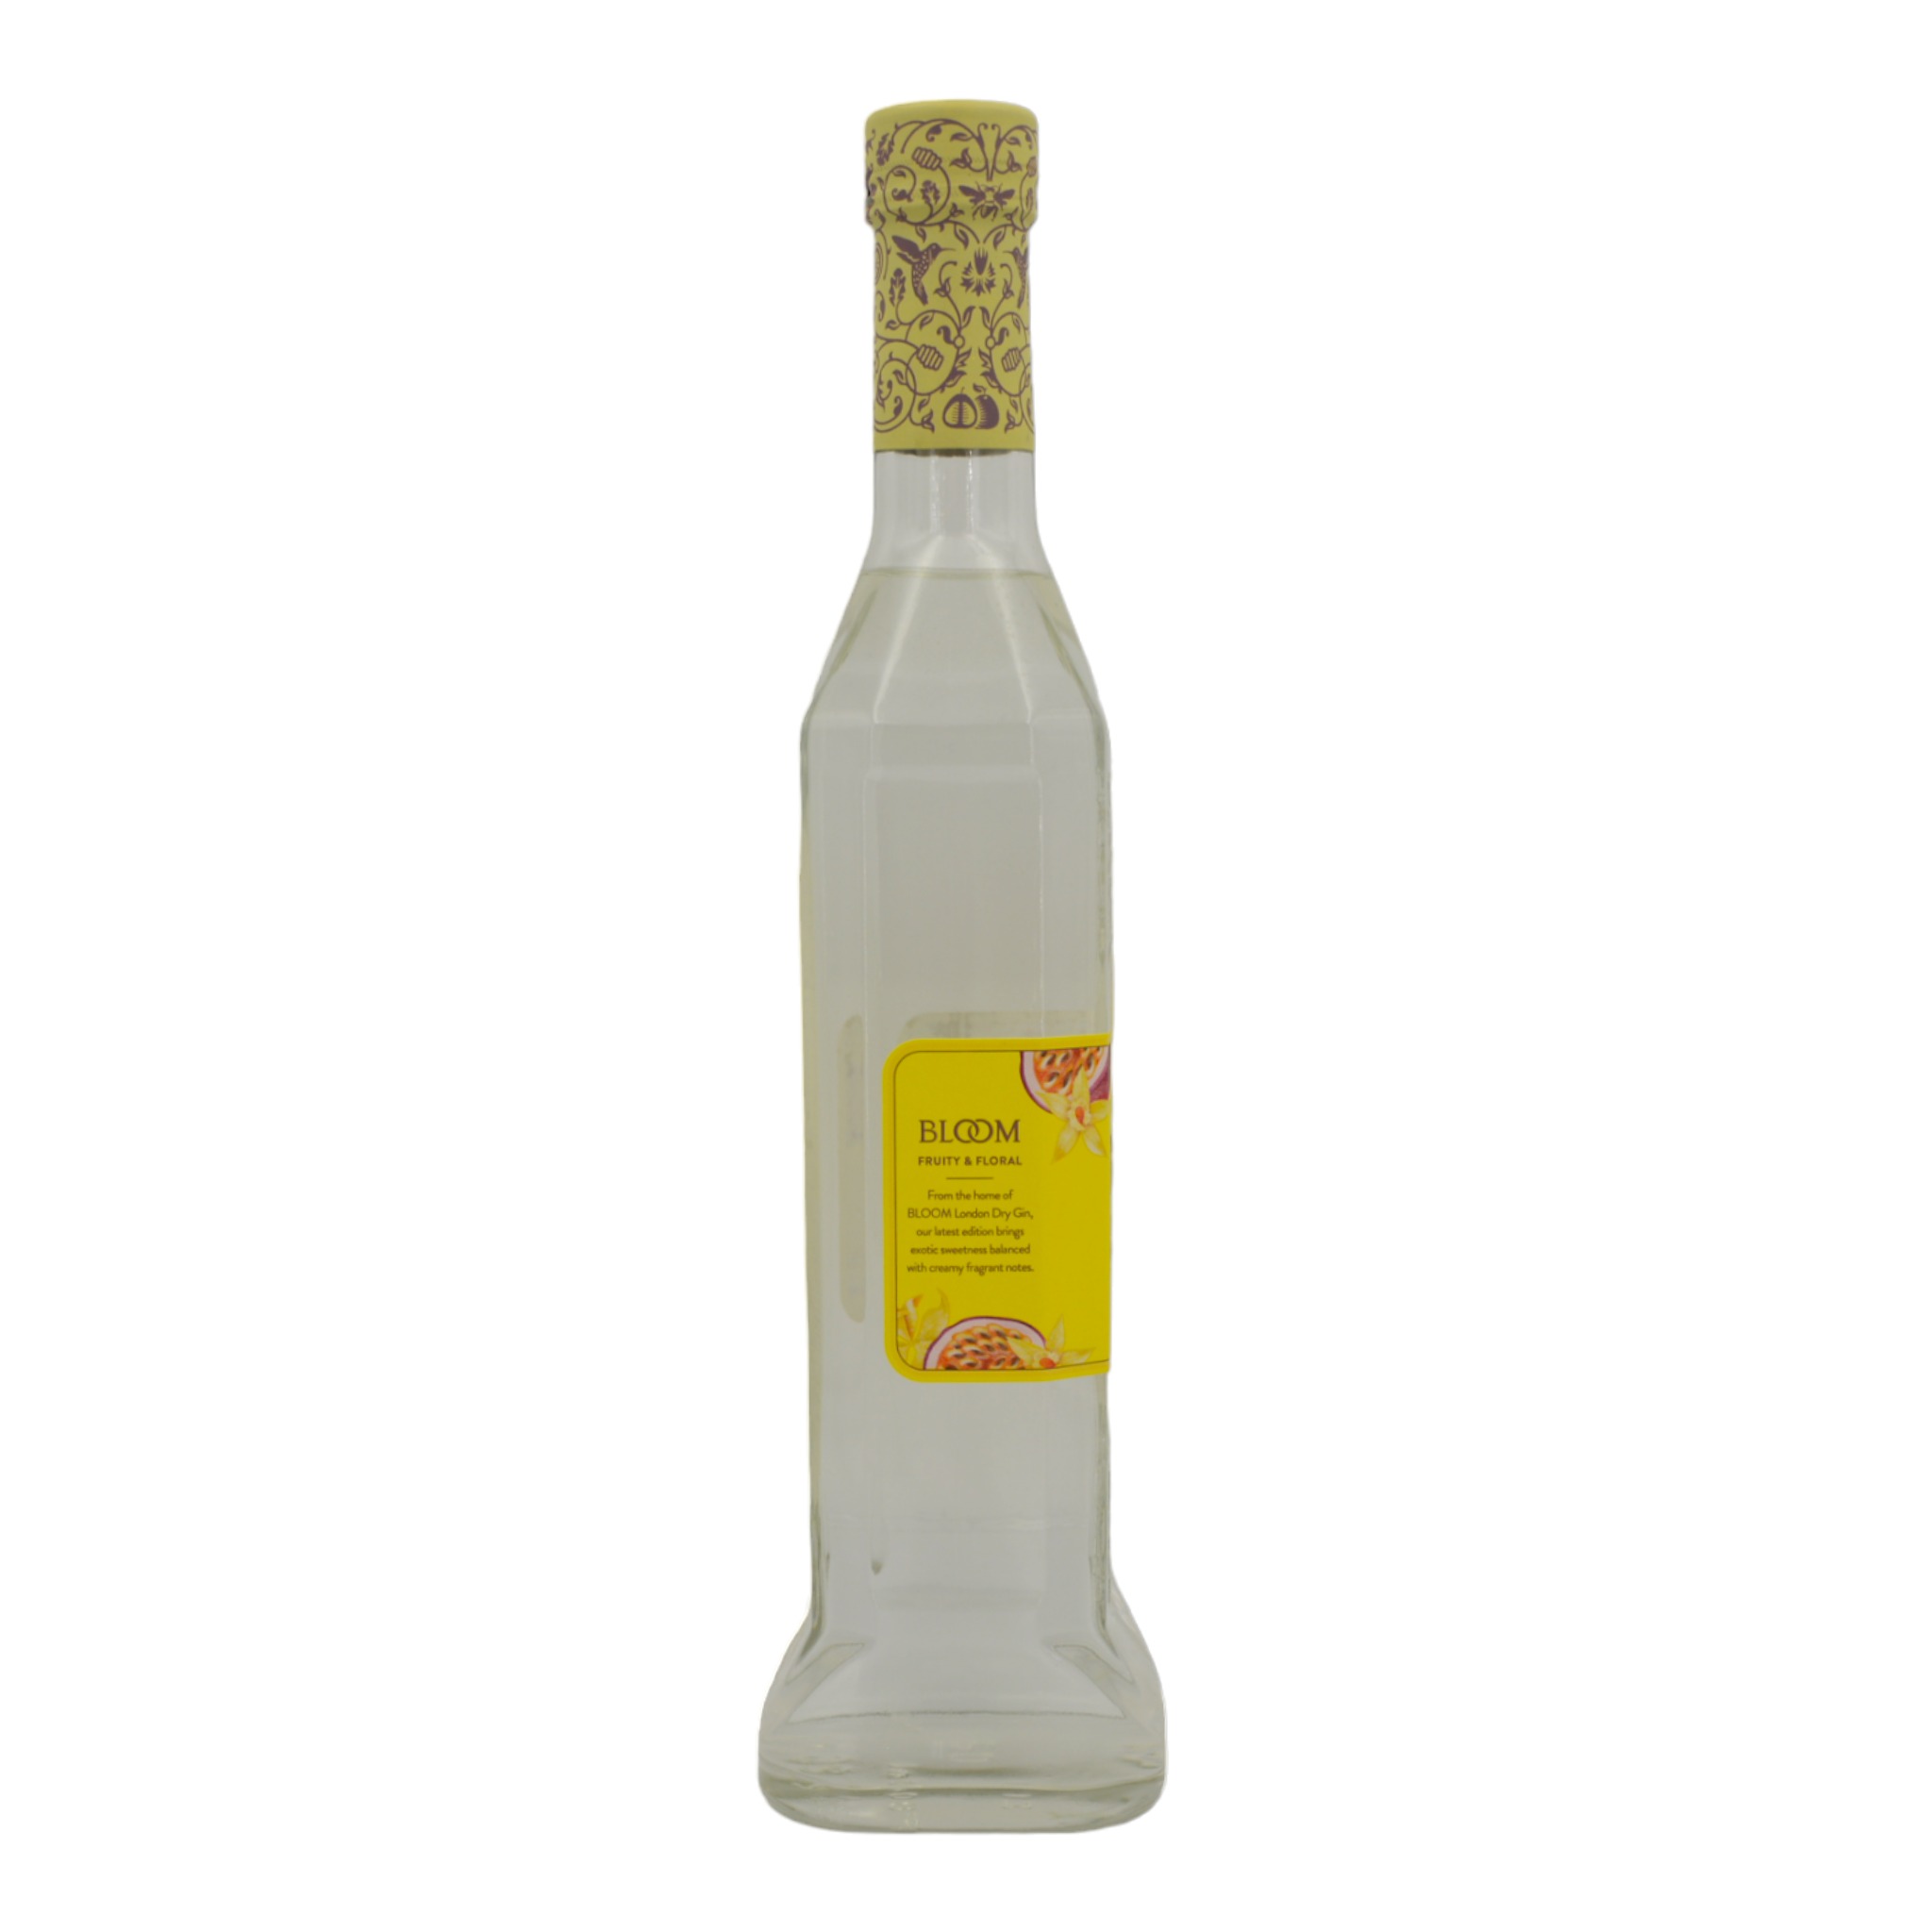 5010296010763Bloom Passionfruit and Vanilla Blossom Gin Limited Edition s2 - Weinhaus-Buecker